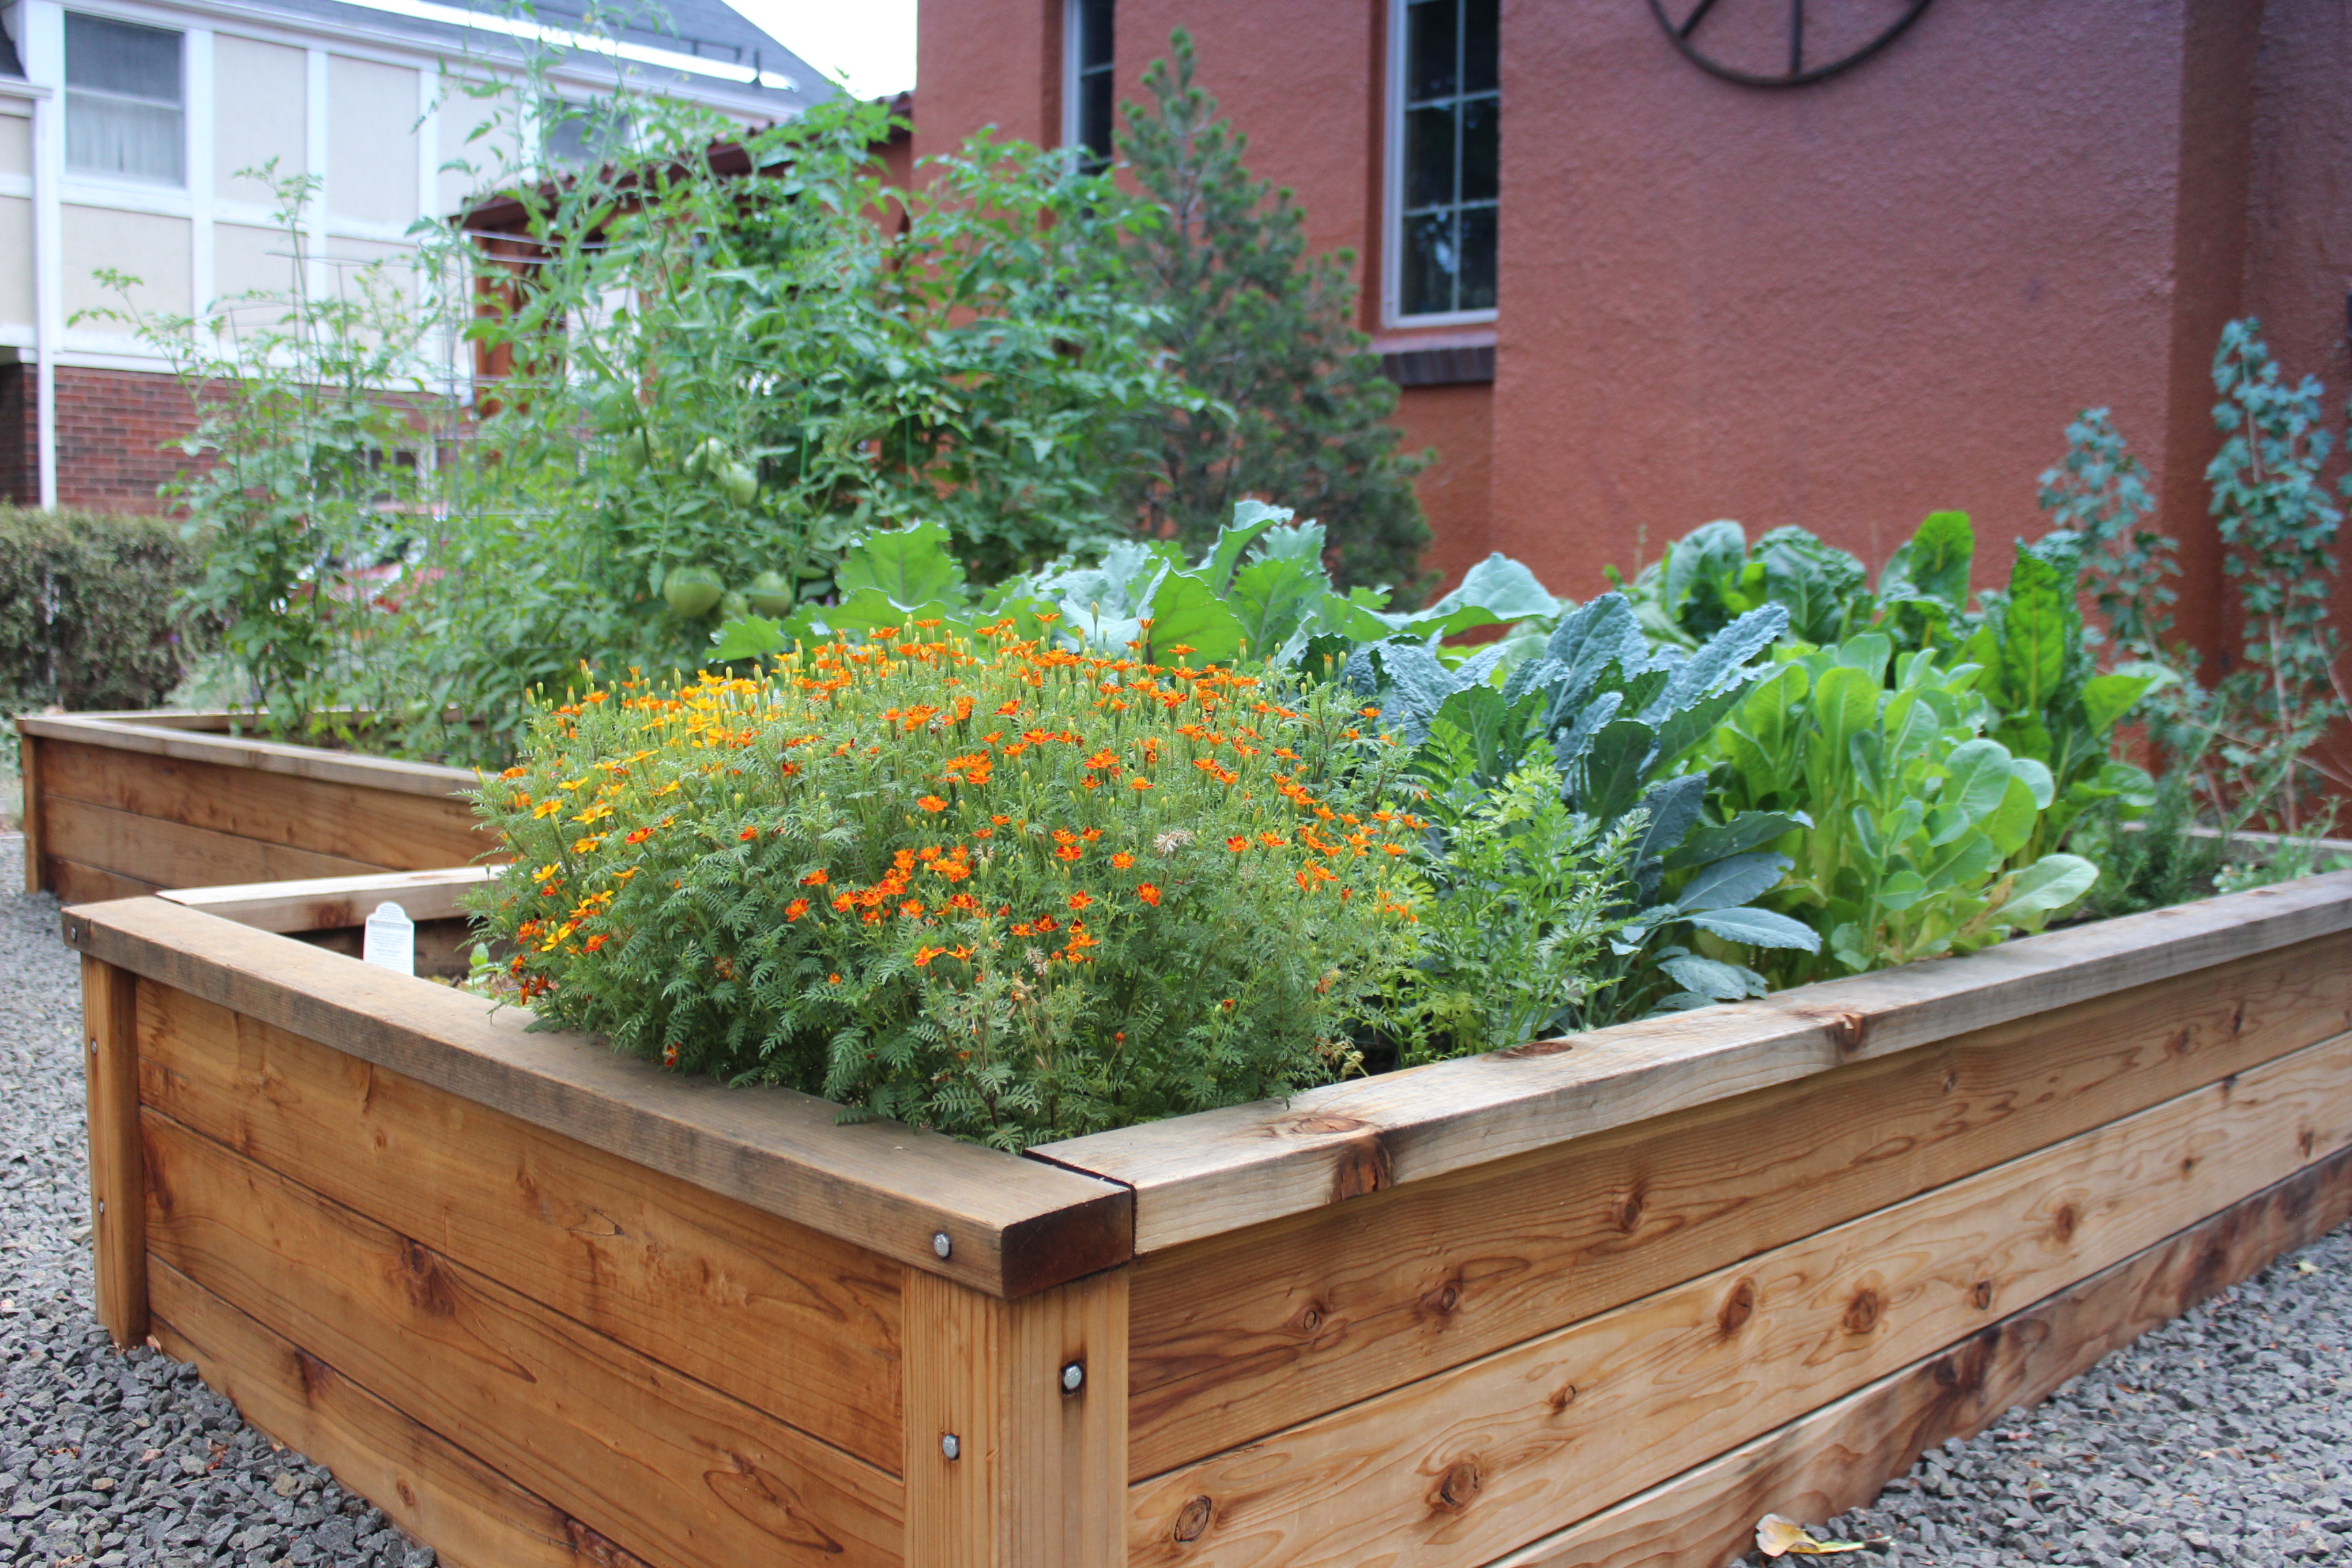 Dinsmore's raised garden beds are proof that a veggie garden can be both beautiful and bountiful.